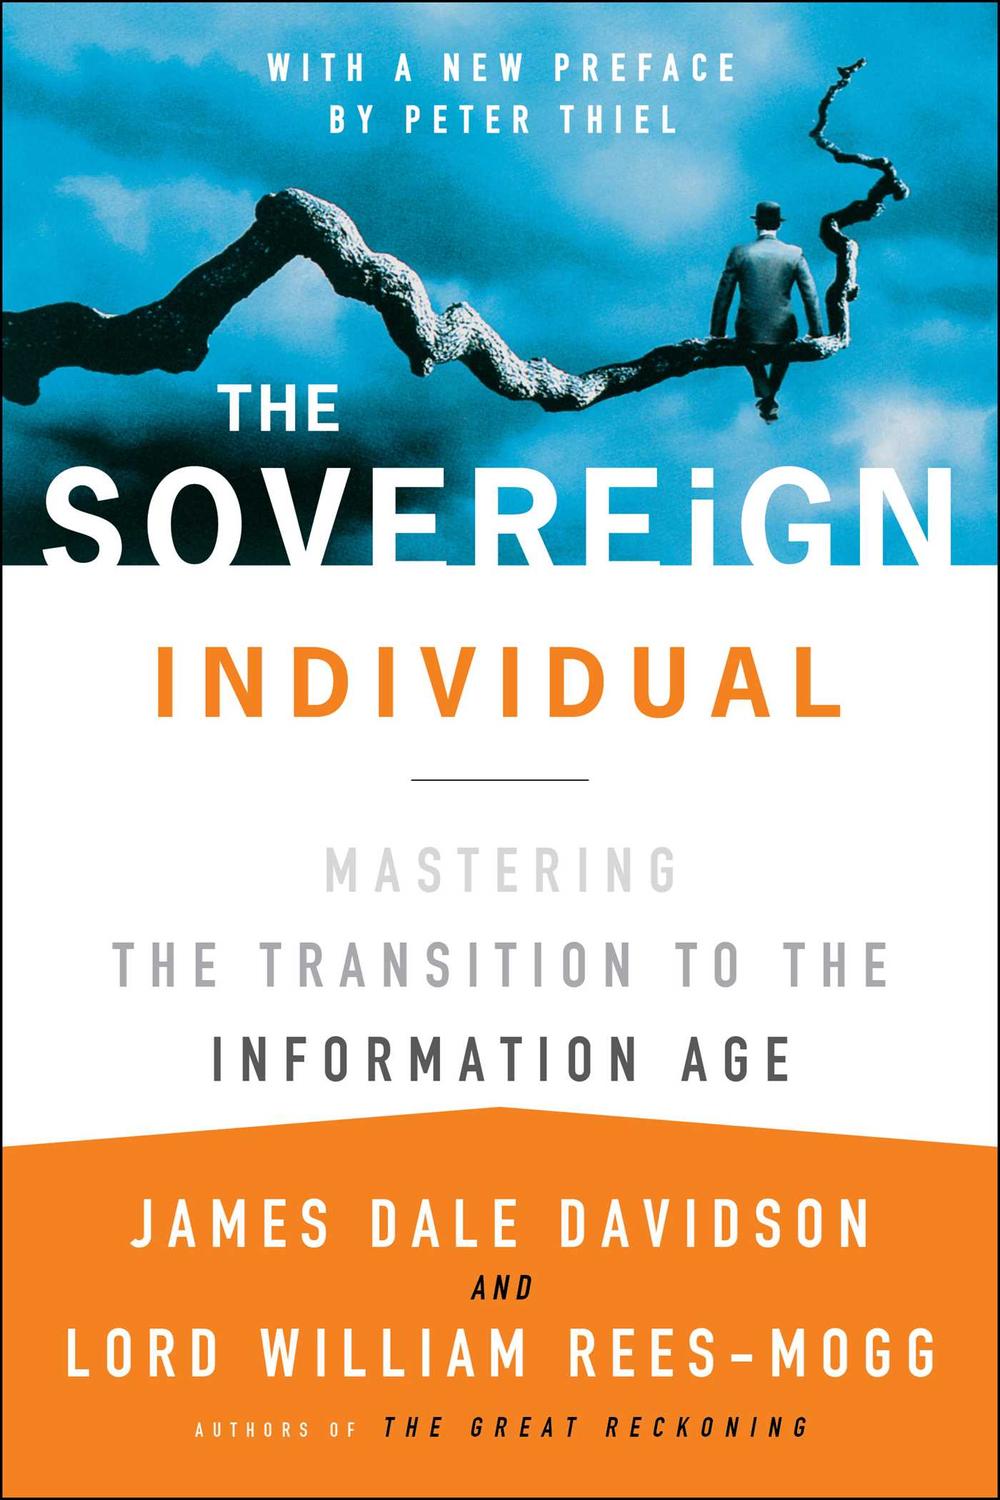 The Sovereign Individual - James Dale Davidson, Lord William Rees-Mogg,,